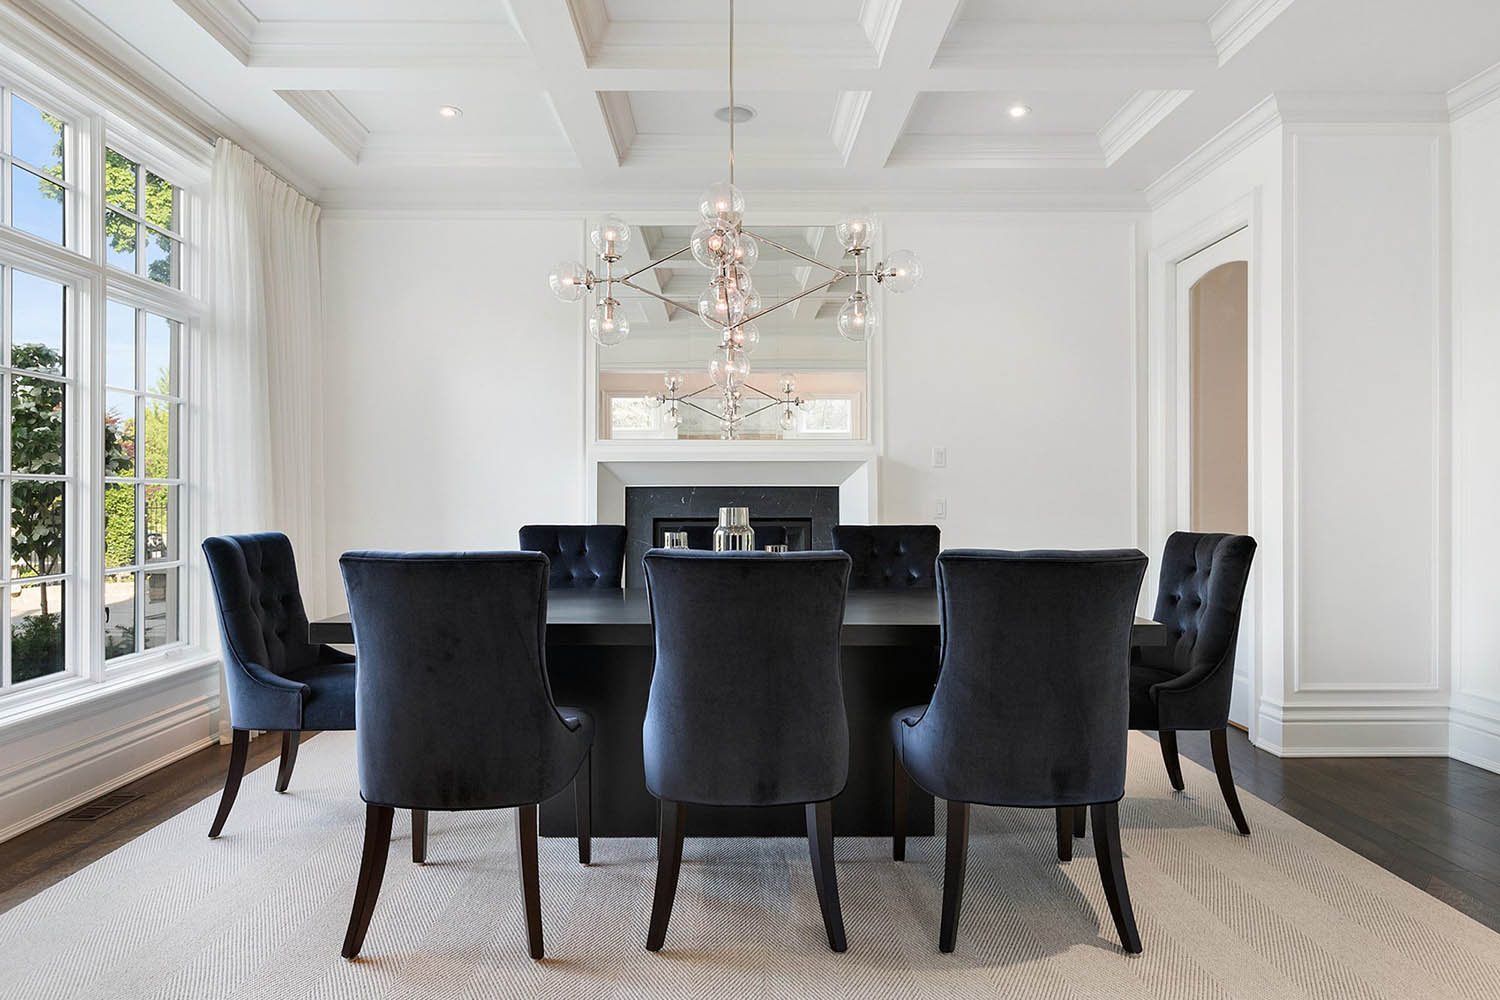 All white dining room with white coffered ceiling with black table and plush chairs. Dark hardwood floors with tan area rug.